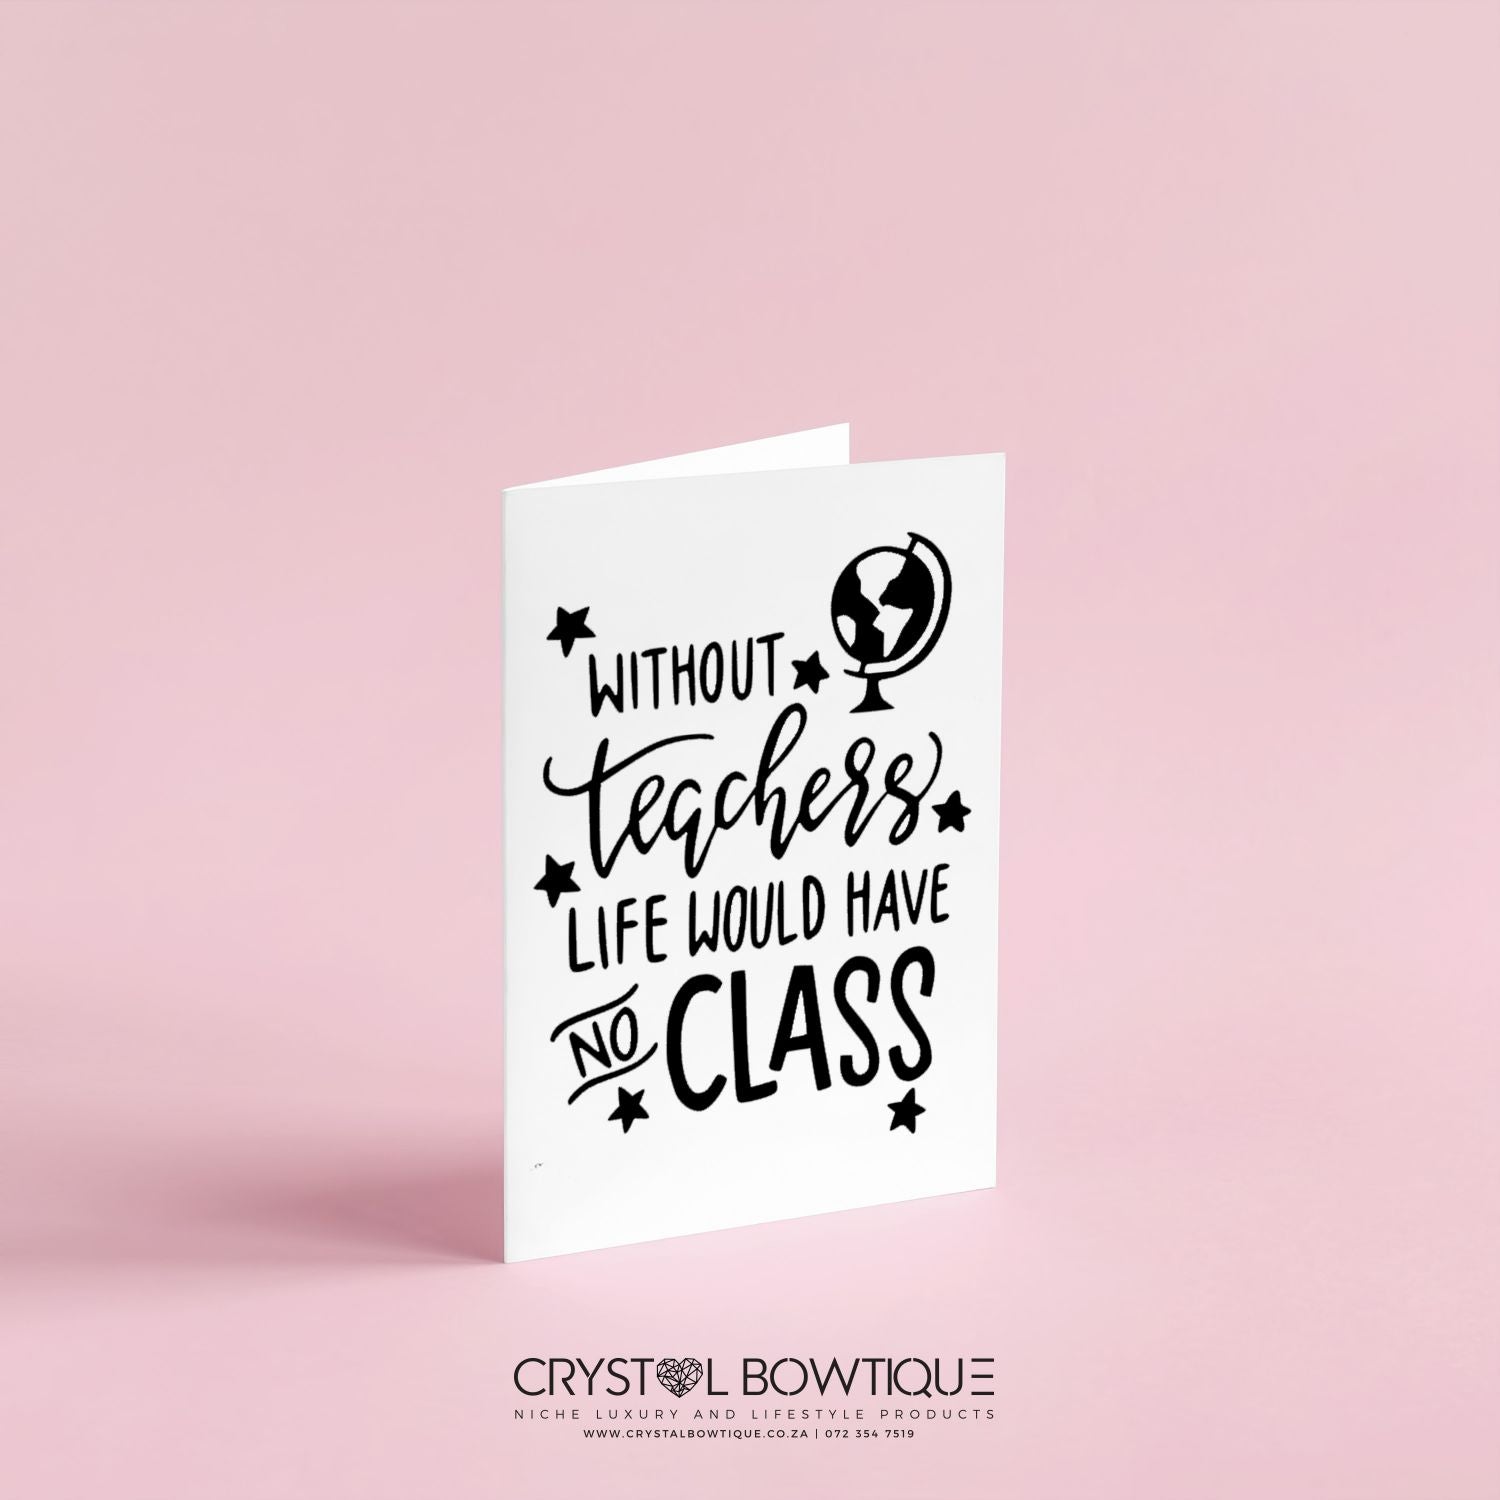 Without Teachers Greeting Card